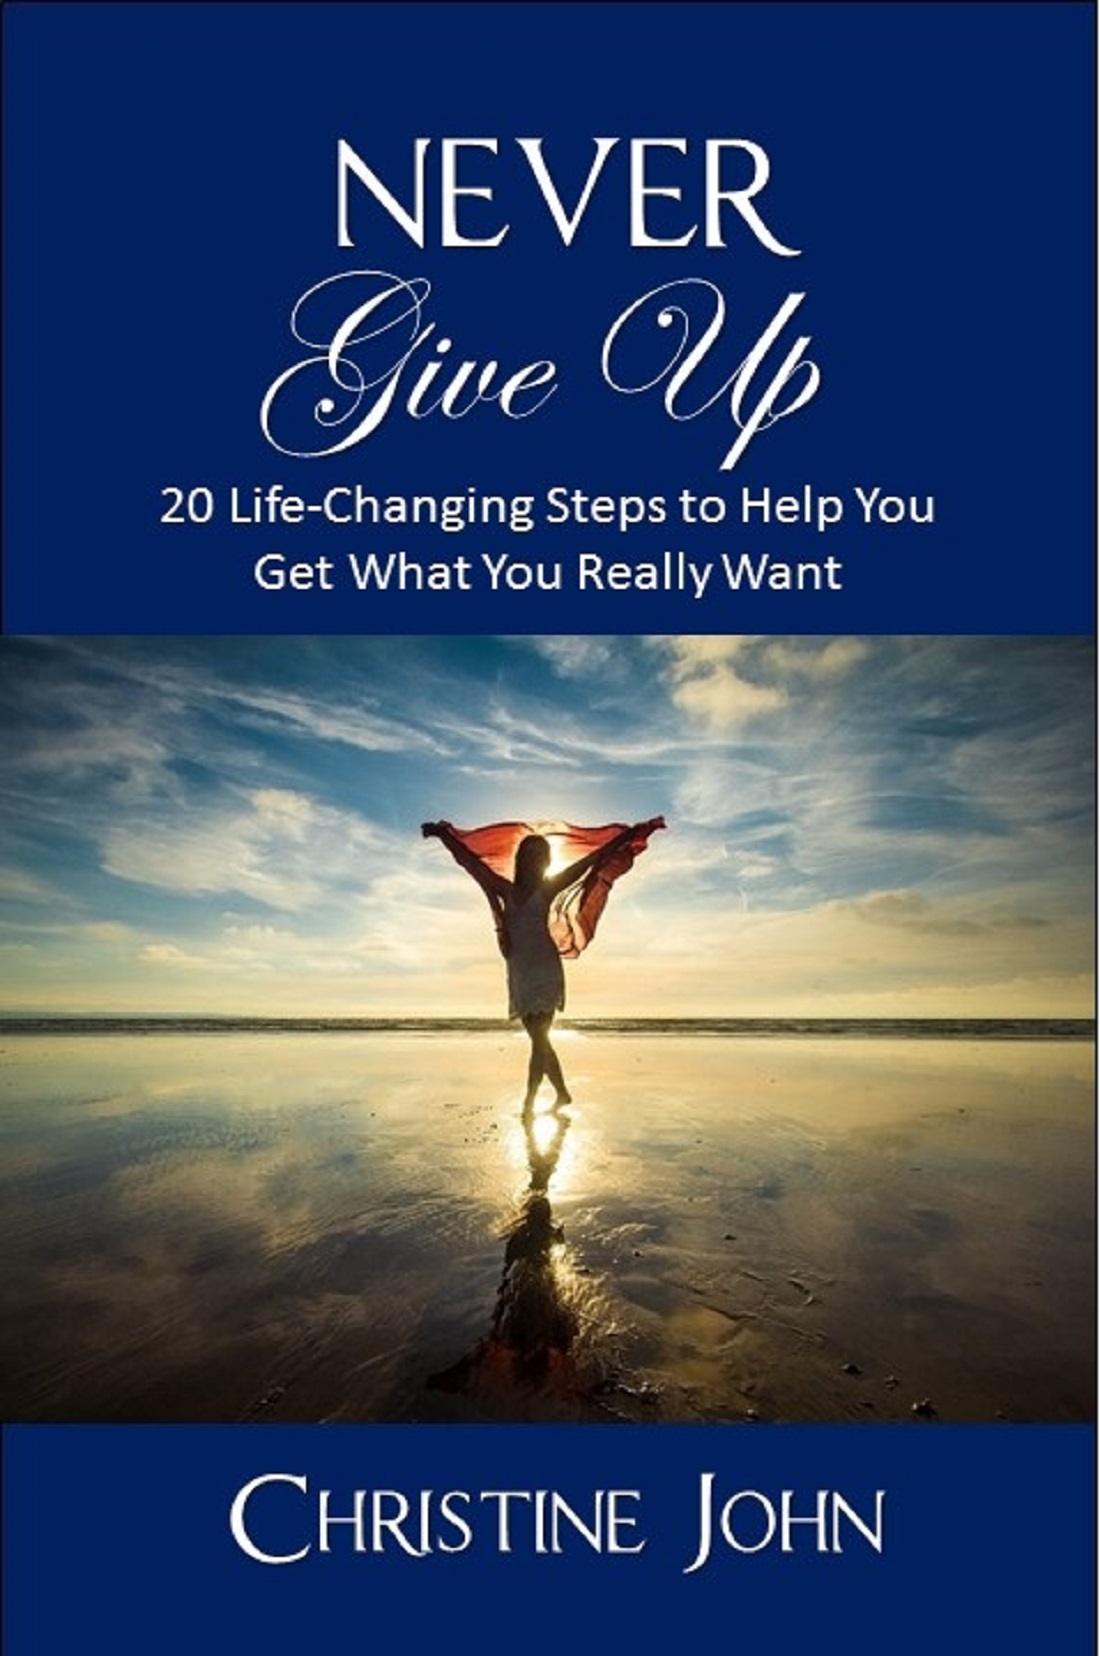 FREE: Never Give Up: 20 Life-Changing Steps to Help You Get What You Really Want by Christine John